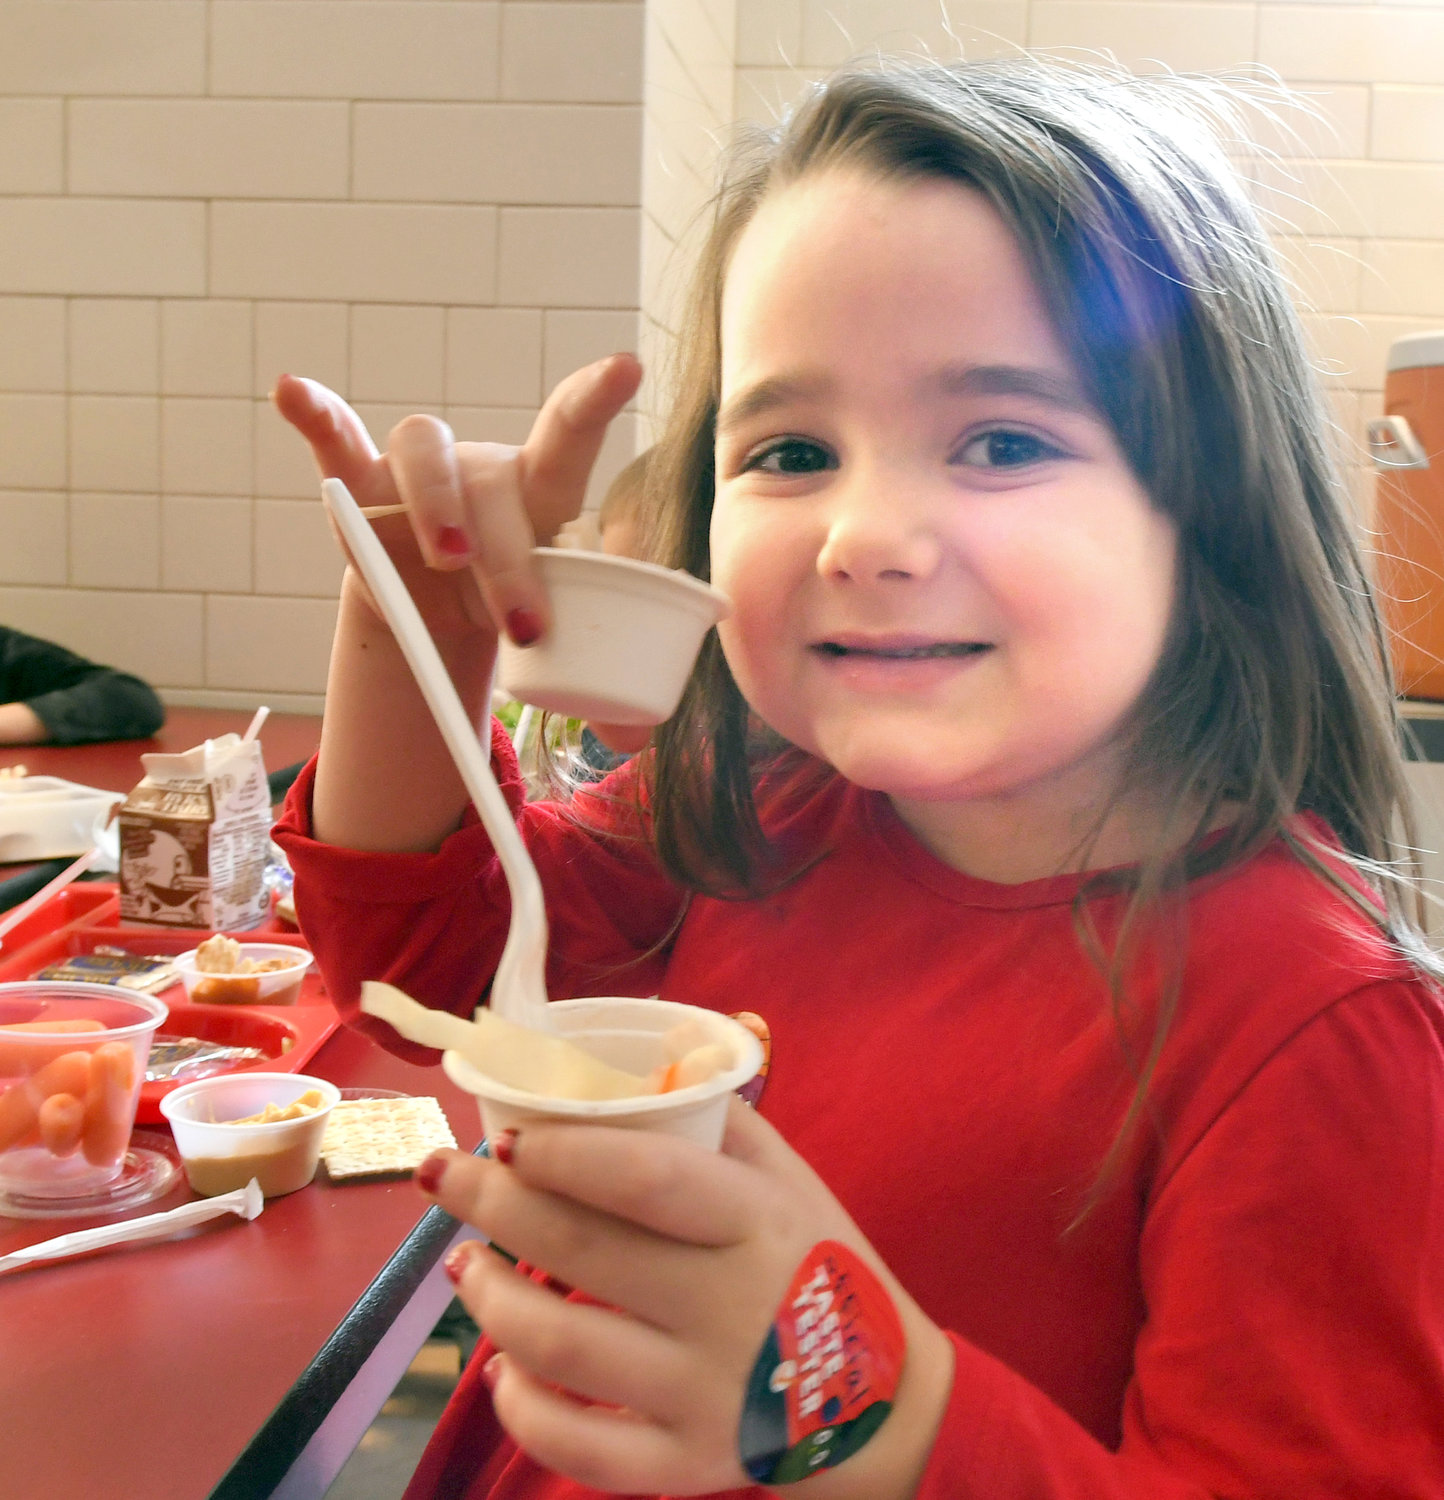 THIS IS GOOD — Clinton Elementary School kindergartener Alexandra Blum holds up the delicious Asian Cabbage Slaw that she tried during lunch on Dec. 18 as part of the Harvest of the Month program that’s part of the Farm to School initiative.